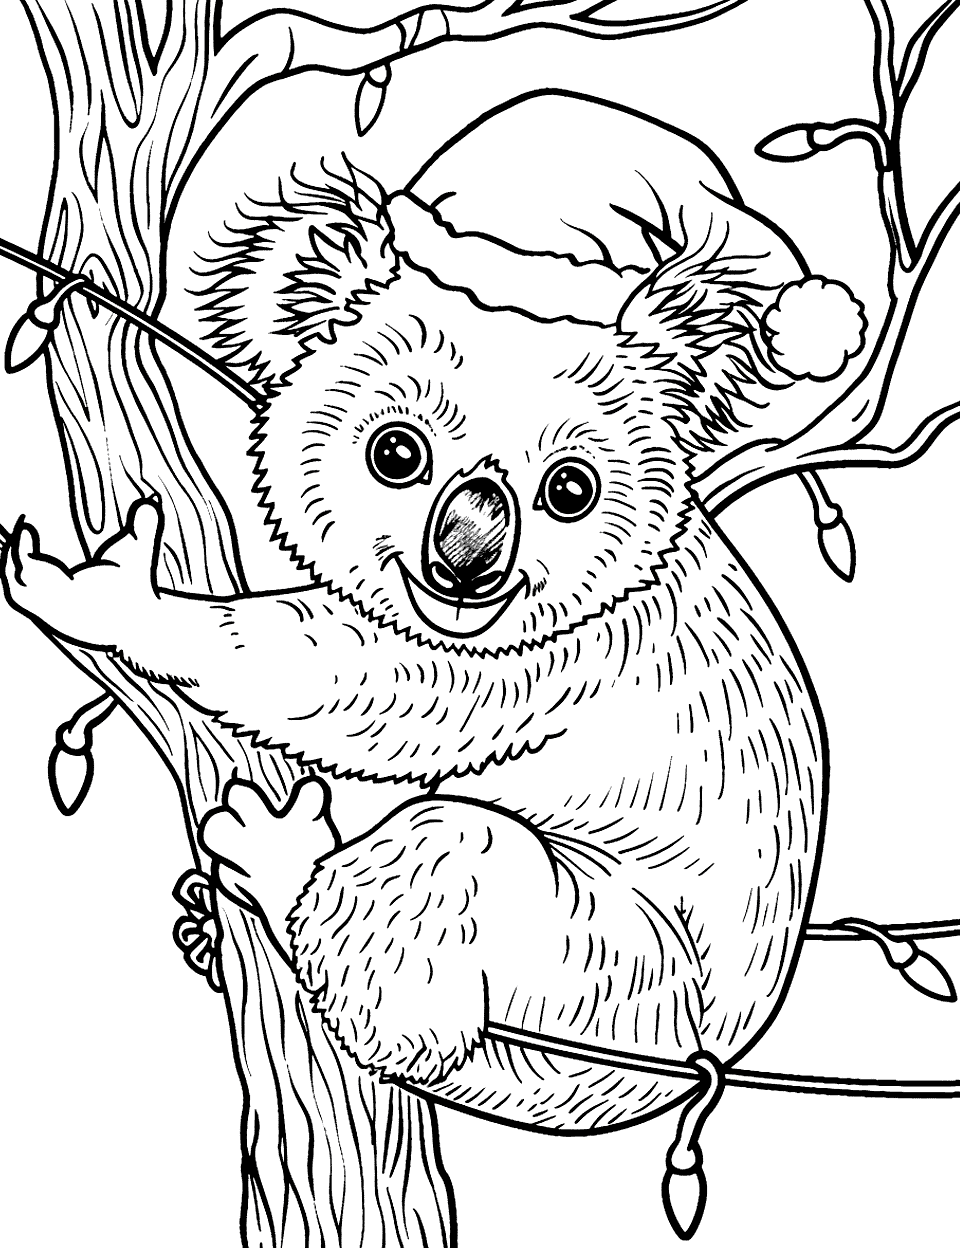 Christmas Koala Celebration Coloring Page - A koala wearing a Santa hat, tangled in a string of colorful lights on a tree.